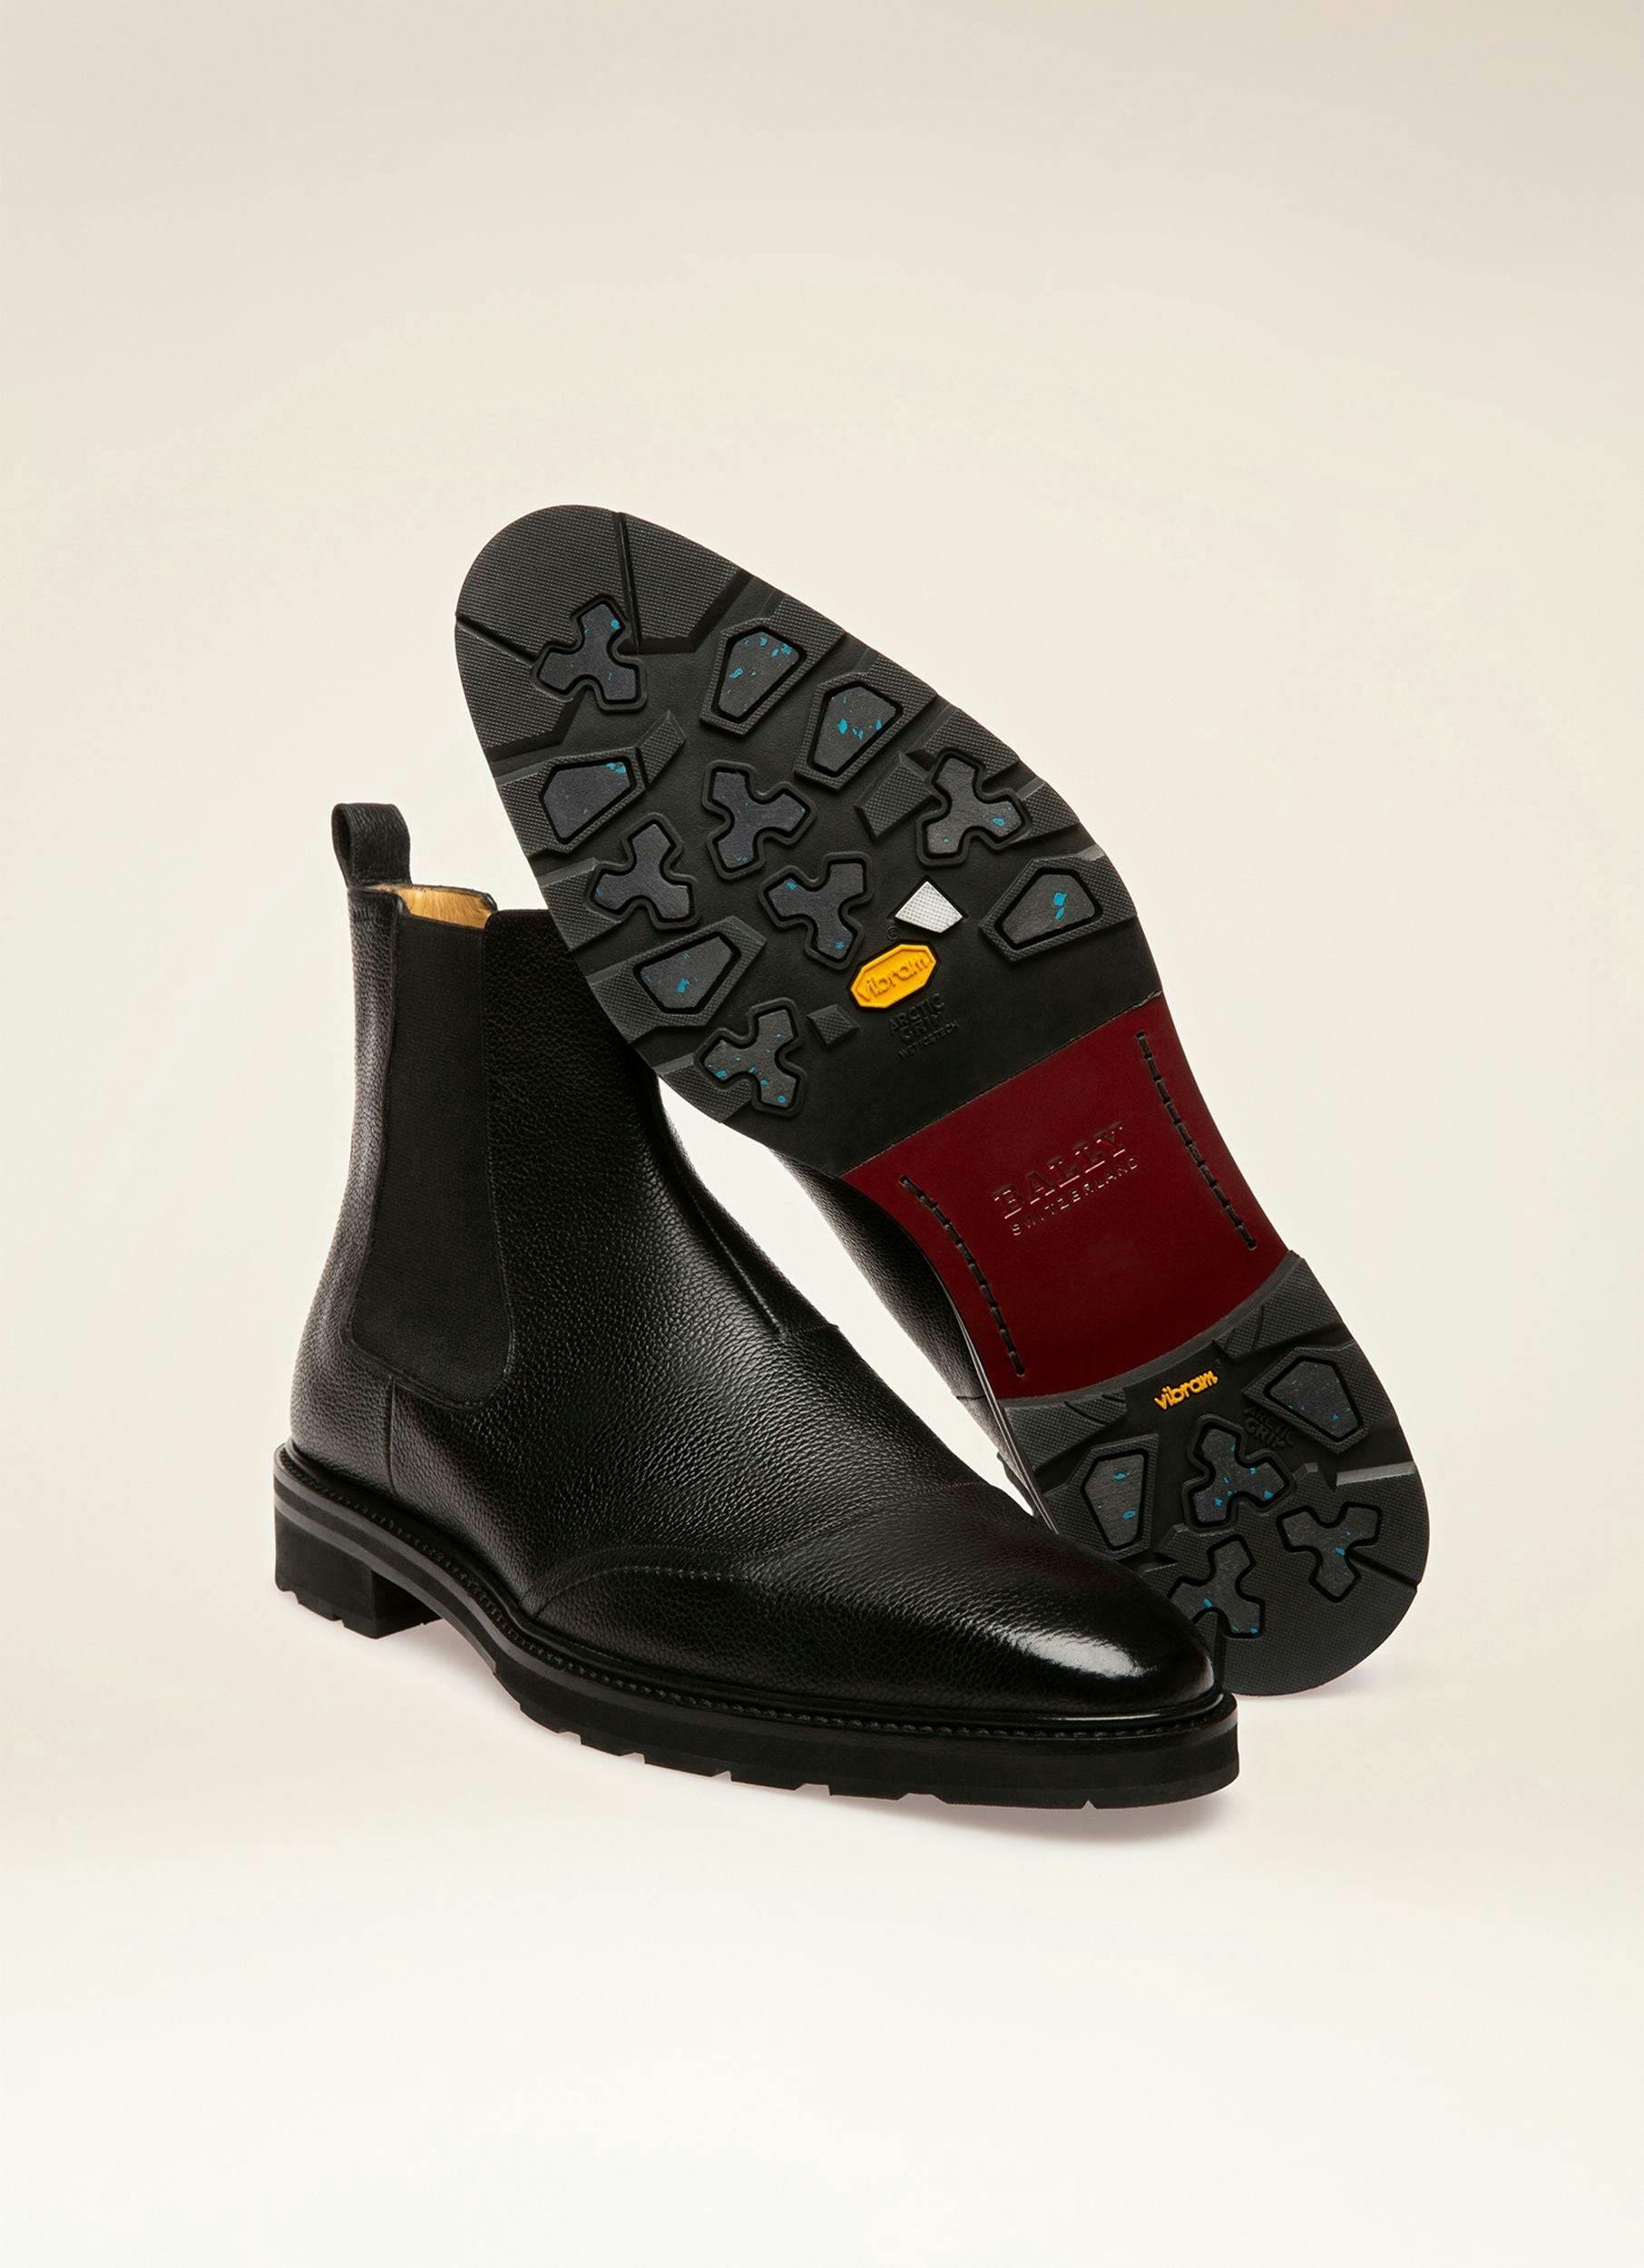 MEYRIN Leather Boots In Black - Men's - Bally - 07